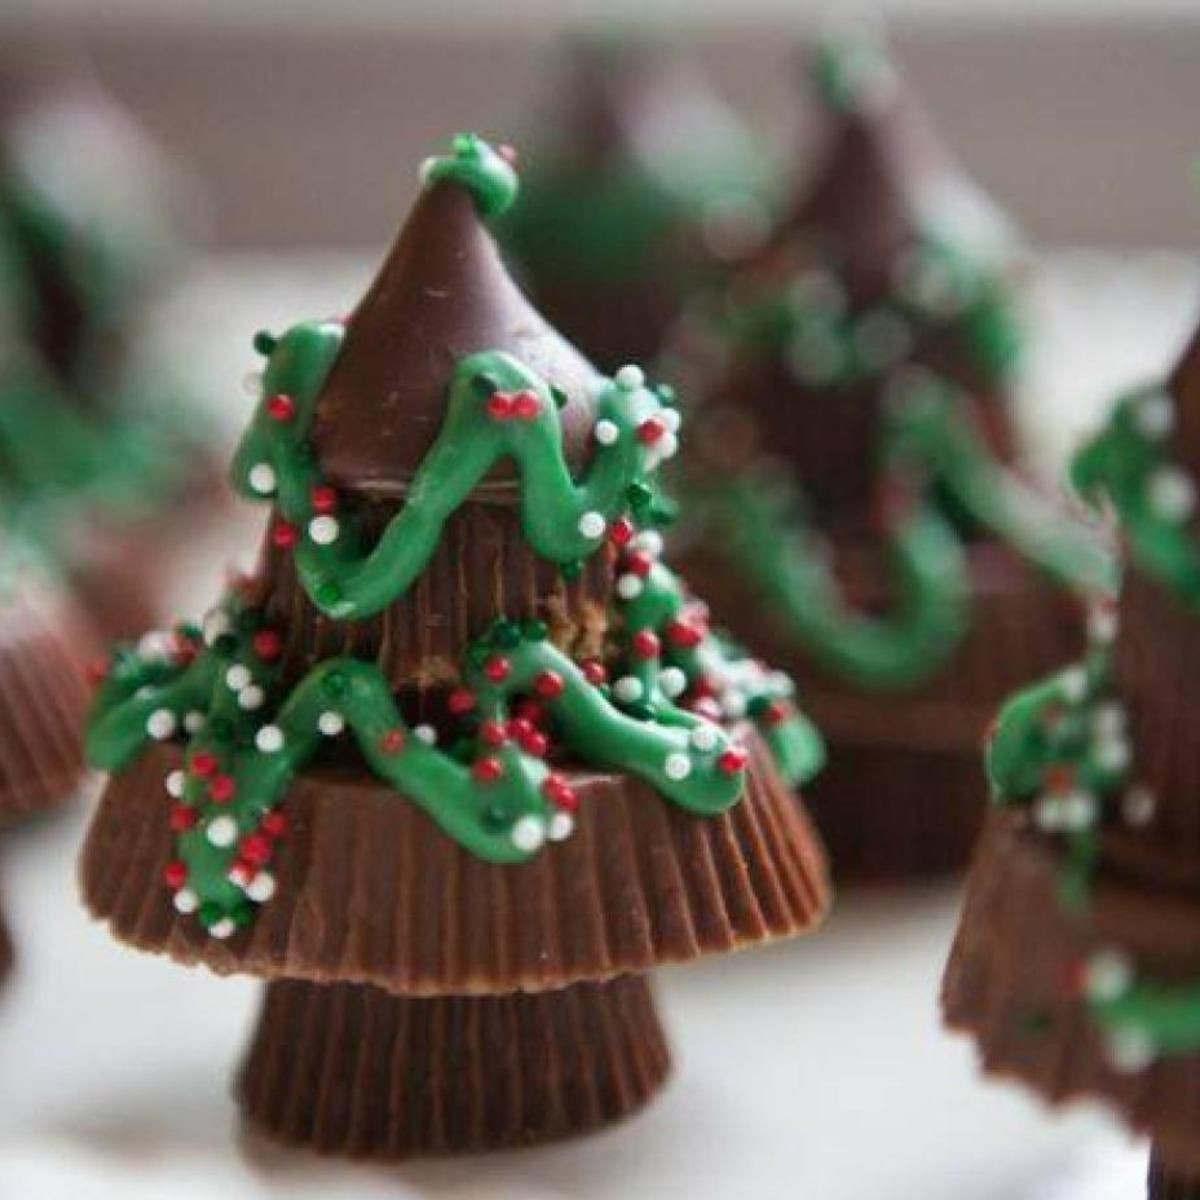 Peanut Butter Christmas Candy
 Reese s Chocolate Candy Christmas Trees Recipe